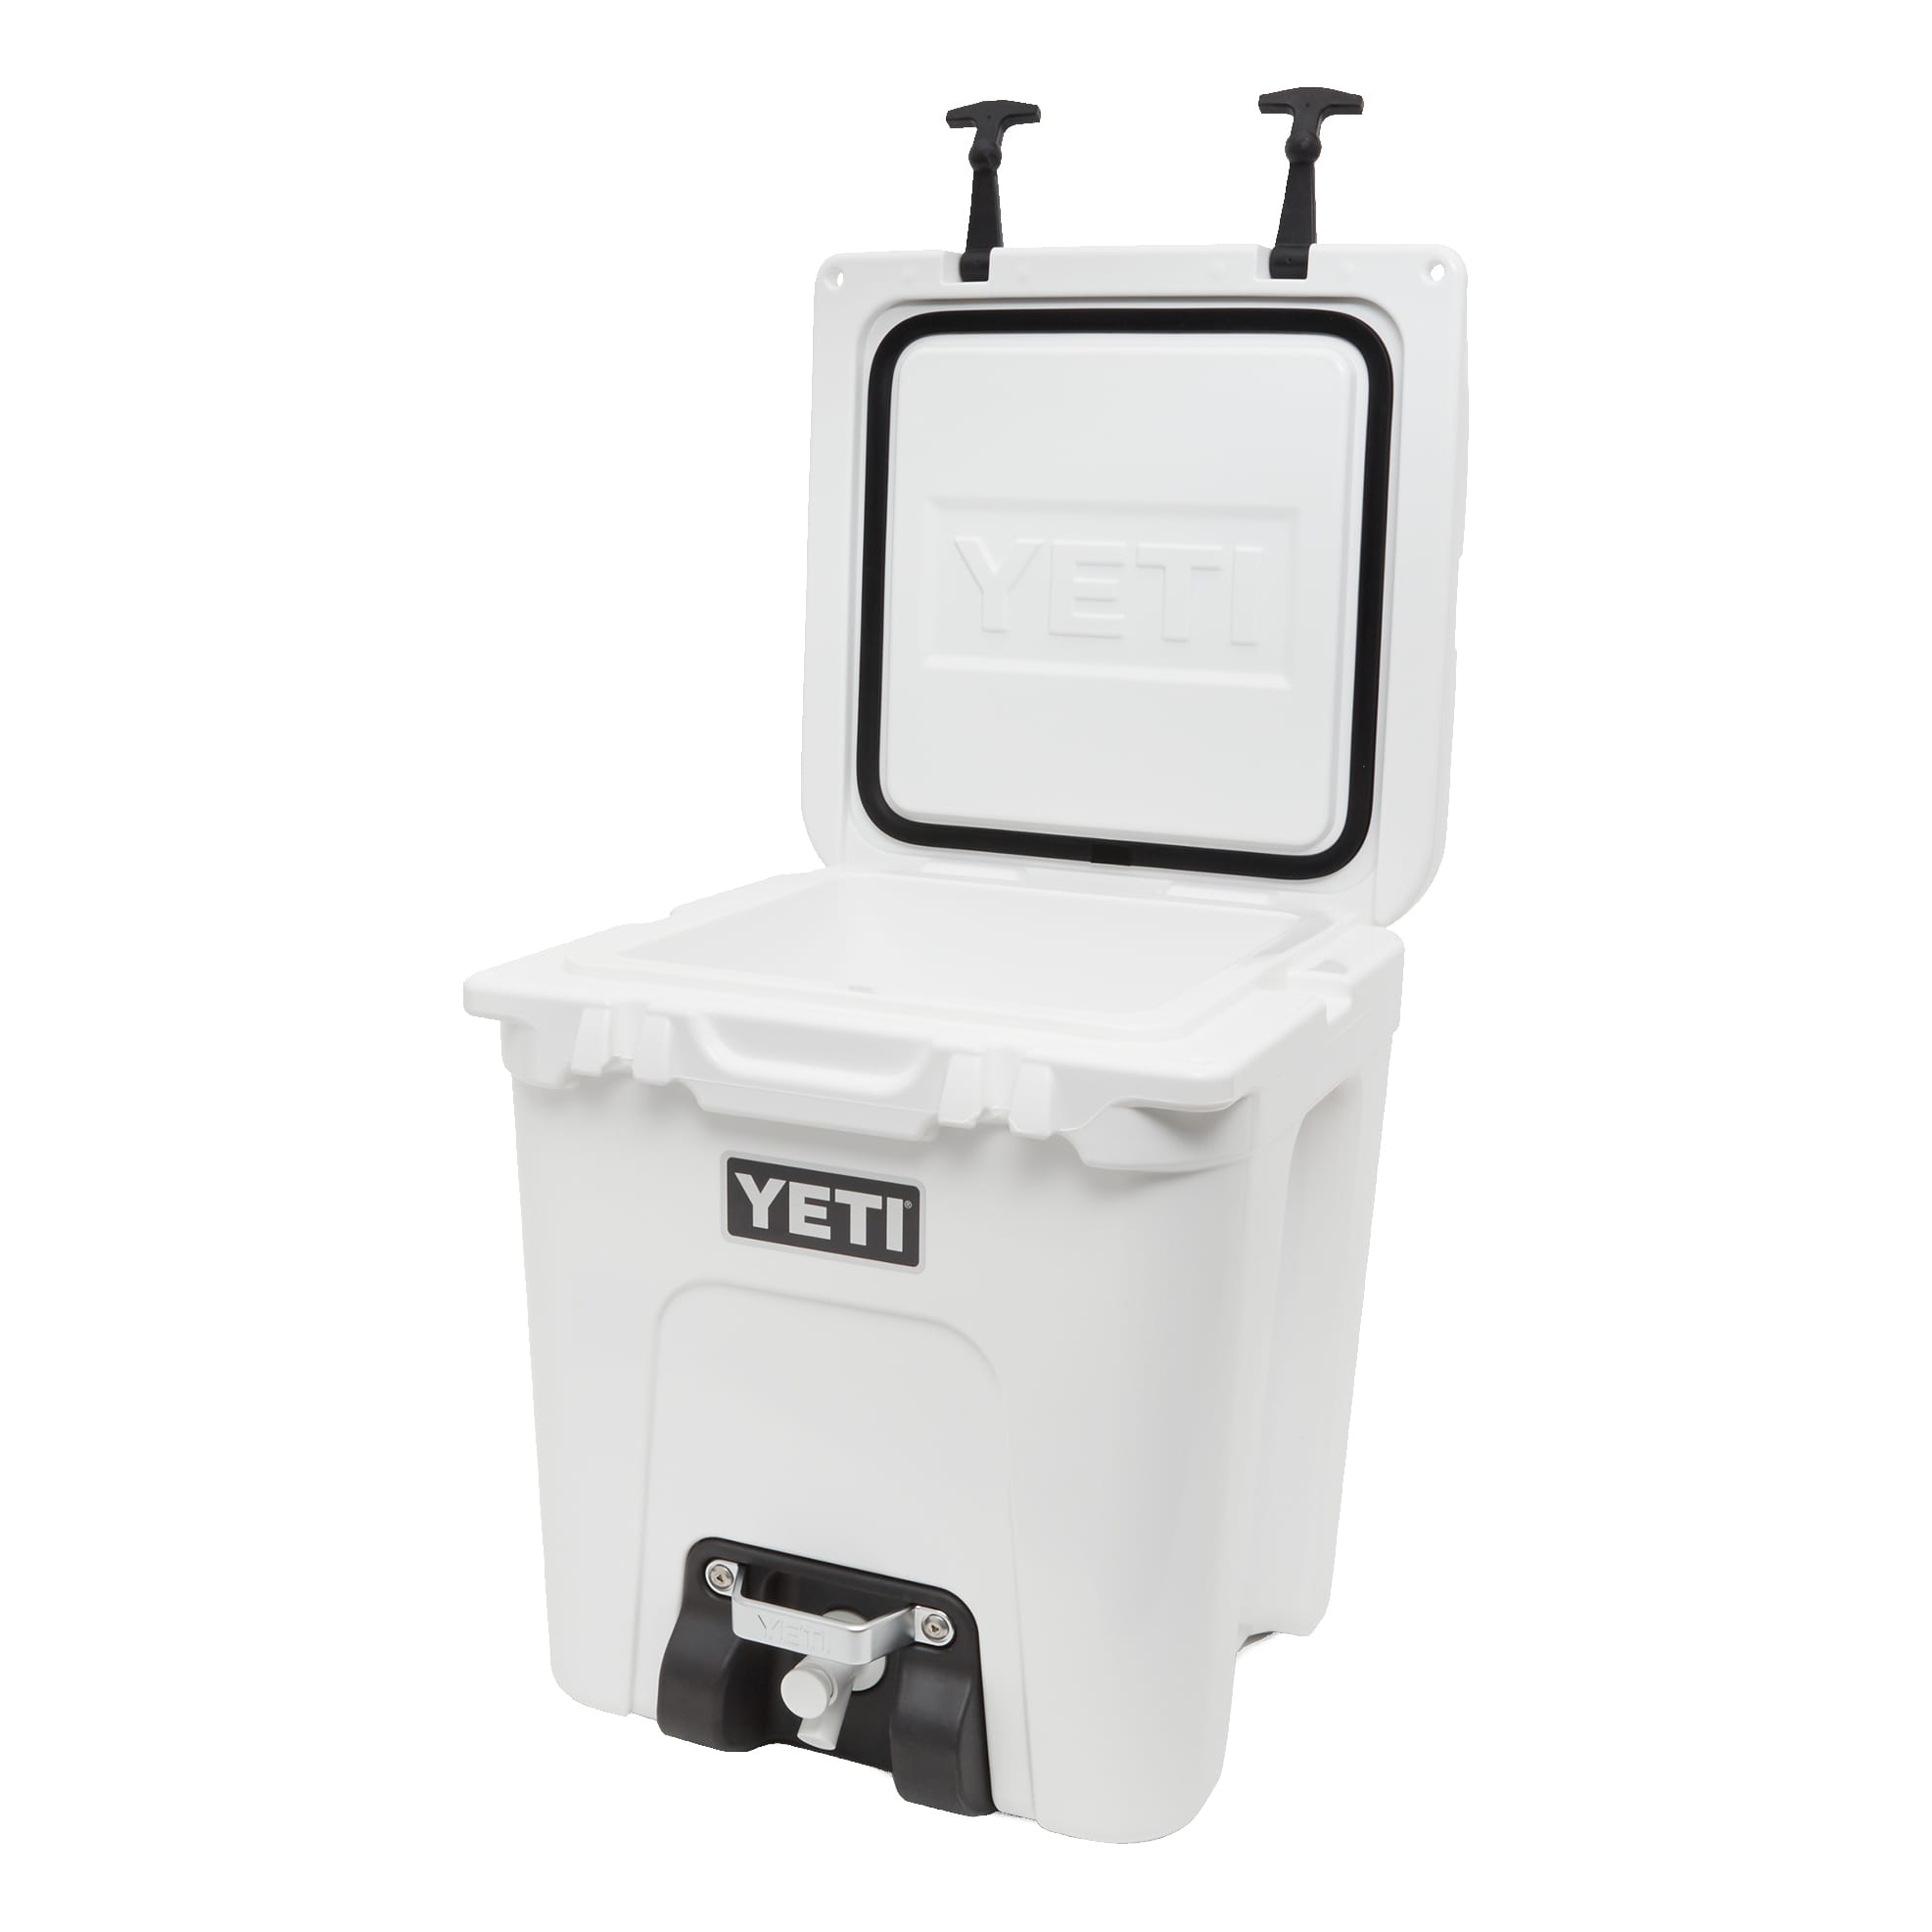 YETI® Silo™ 6G Water Cooler - Open View